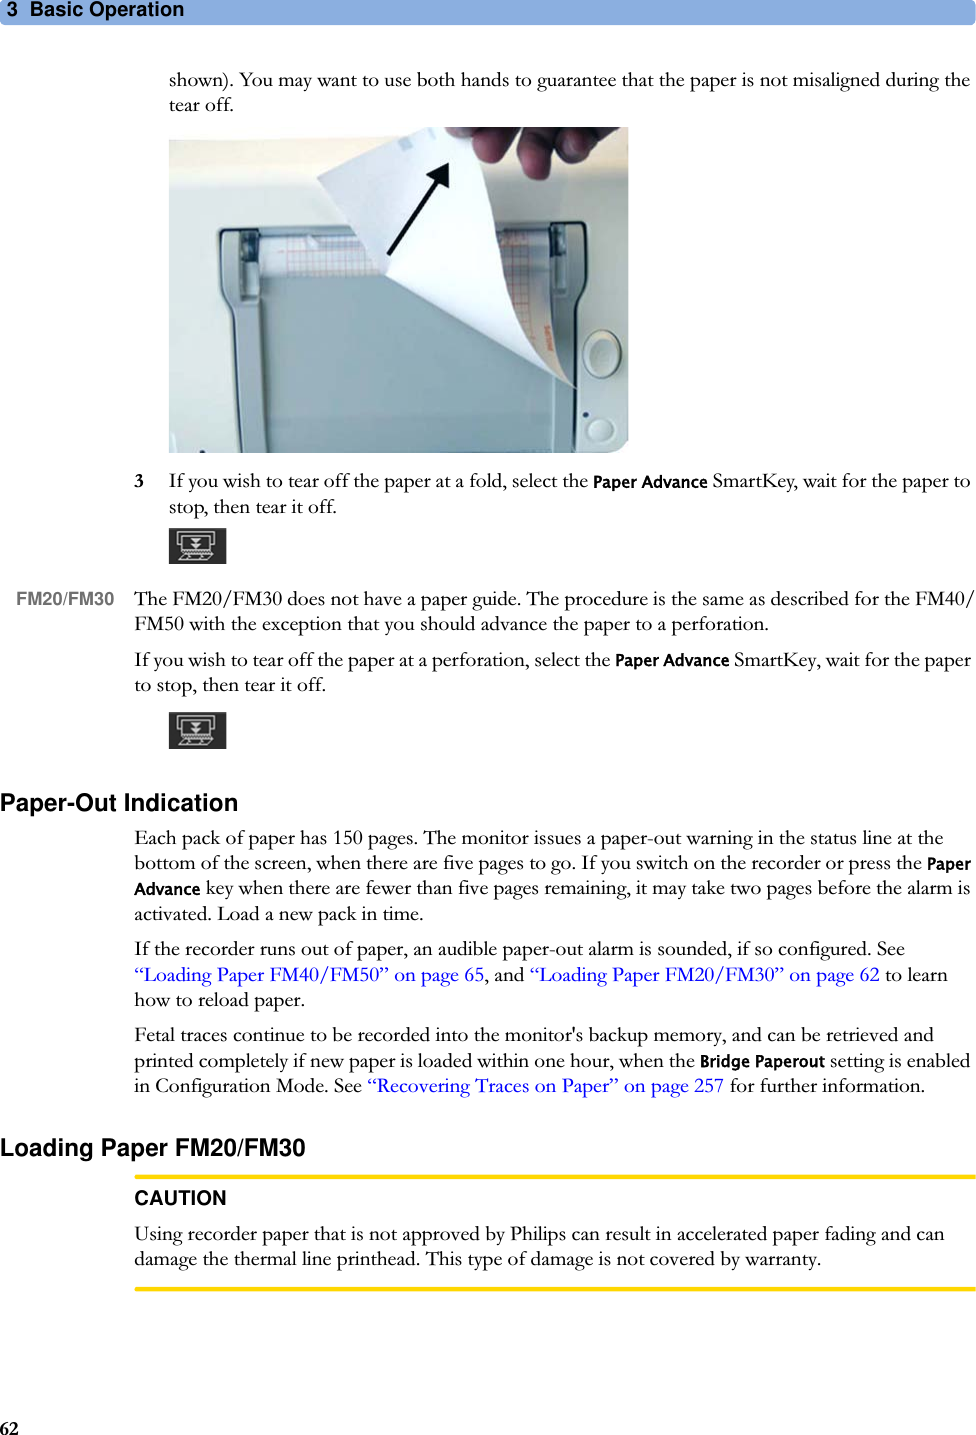 3  Basic Operation62shown). You may want to use both hands to guarantee that the paper is not misaligned during the tear off.3If you wish to tear off the paper at a fold, select the Paper Advance SmartKey, wait for the paper to stop, then tear it off.FM20/FM30 The FM20/FM30 does not have a paper guide. The procedure is the same as described for the FM40/FM50 with the exception that you should advance the paper to a perforation.If you wish to tear off the paper at a perforation, select the Paper Advance SmartKey, wait for the paper to stop, then tear it off.Paper-Out IndicationEach pack of paper has 150 pages. The monitor issues a paper-out warning in the status line at the bottom of the screen, when there are five pages to go. If you switch on the recorder or press the Paper Advance key when there are fewer than five pages remaining, it may take two pages before the alarm is activated. Load a new pack in time.If the recorder runs out of paper, an audible paper-out alarm is sounded, if so configured. See “Loading Paper FM40/FM50” on page 65, and “Loading Paper FM20/FM30” on page 62 to learn how to reload paper.Fetal traces continue to be recorded into the monitor&apos;s backup memory, and can be retrieved and printed completely if new paper is loaded within one hour, when the Bridge Paperout setting is enabled in Configuration Mode. See “Recovering Traces on Paper” on page 257 for further information.Loading Paper FM20/FM30CAUTIONUsing recorder paper that is not approved by Philips can result in accelerated paper fading and can damage the thermal line printhead. This type of damage is not covered by warranty.